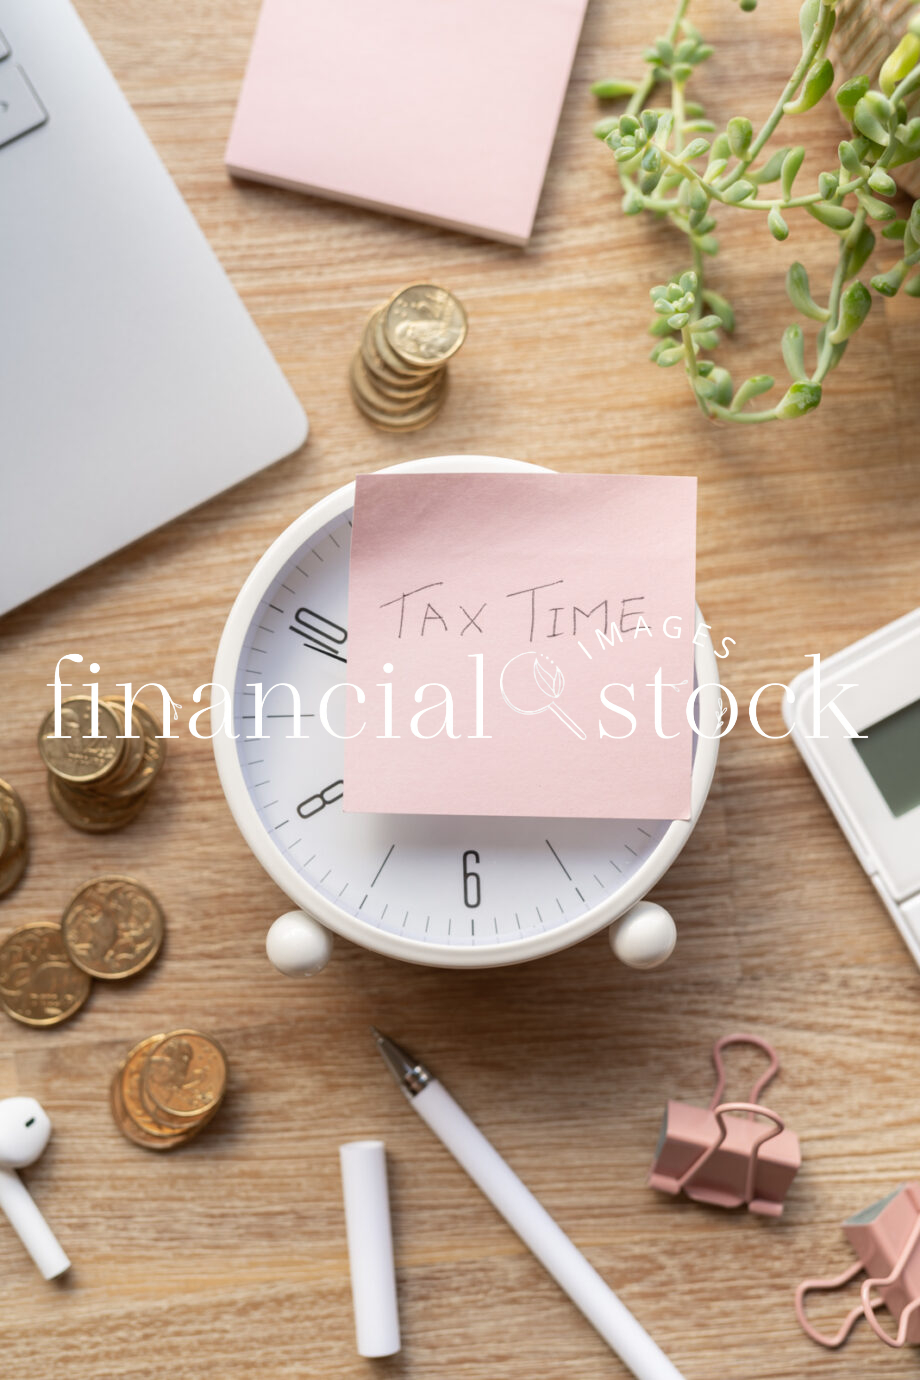 Financial Stock Images - Working out taxes from home.